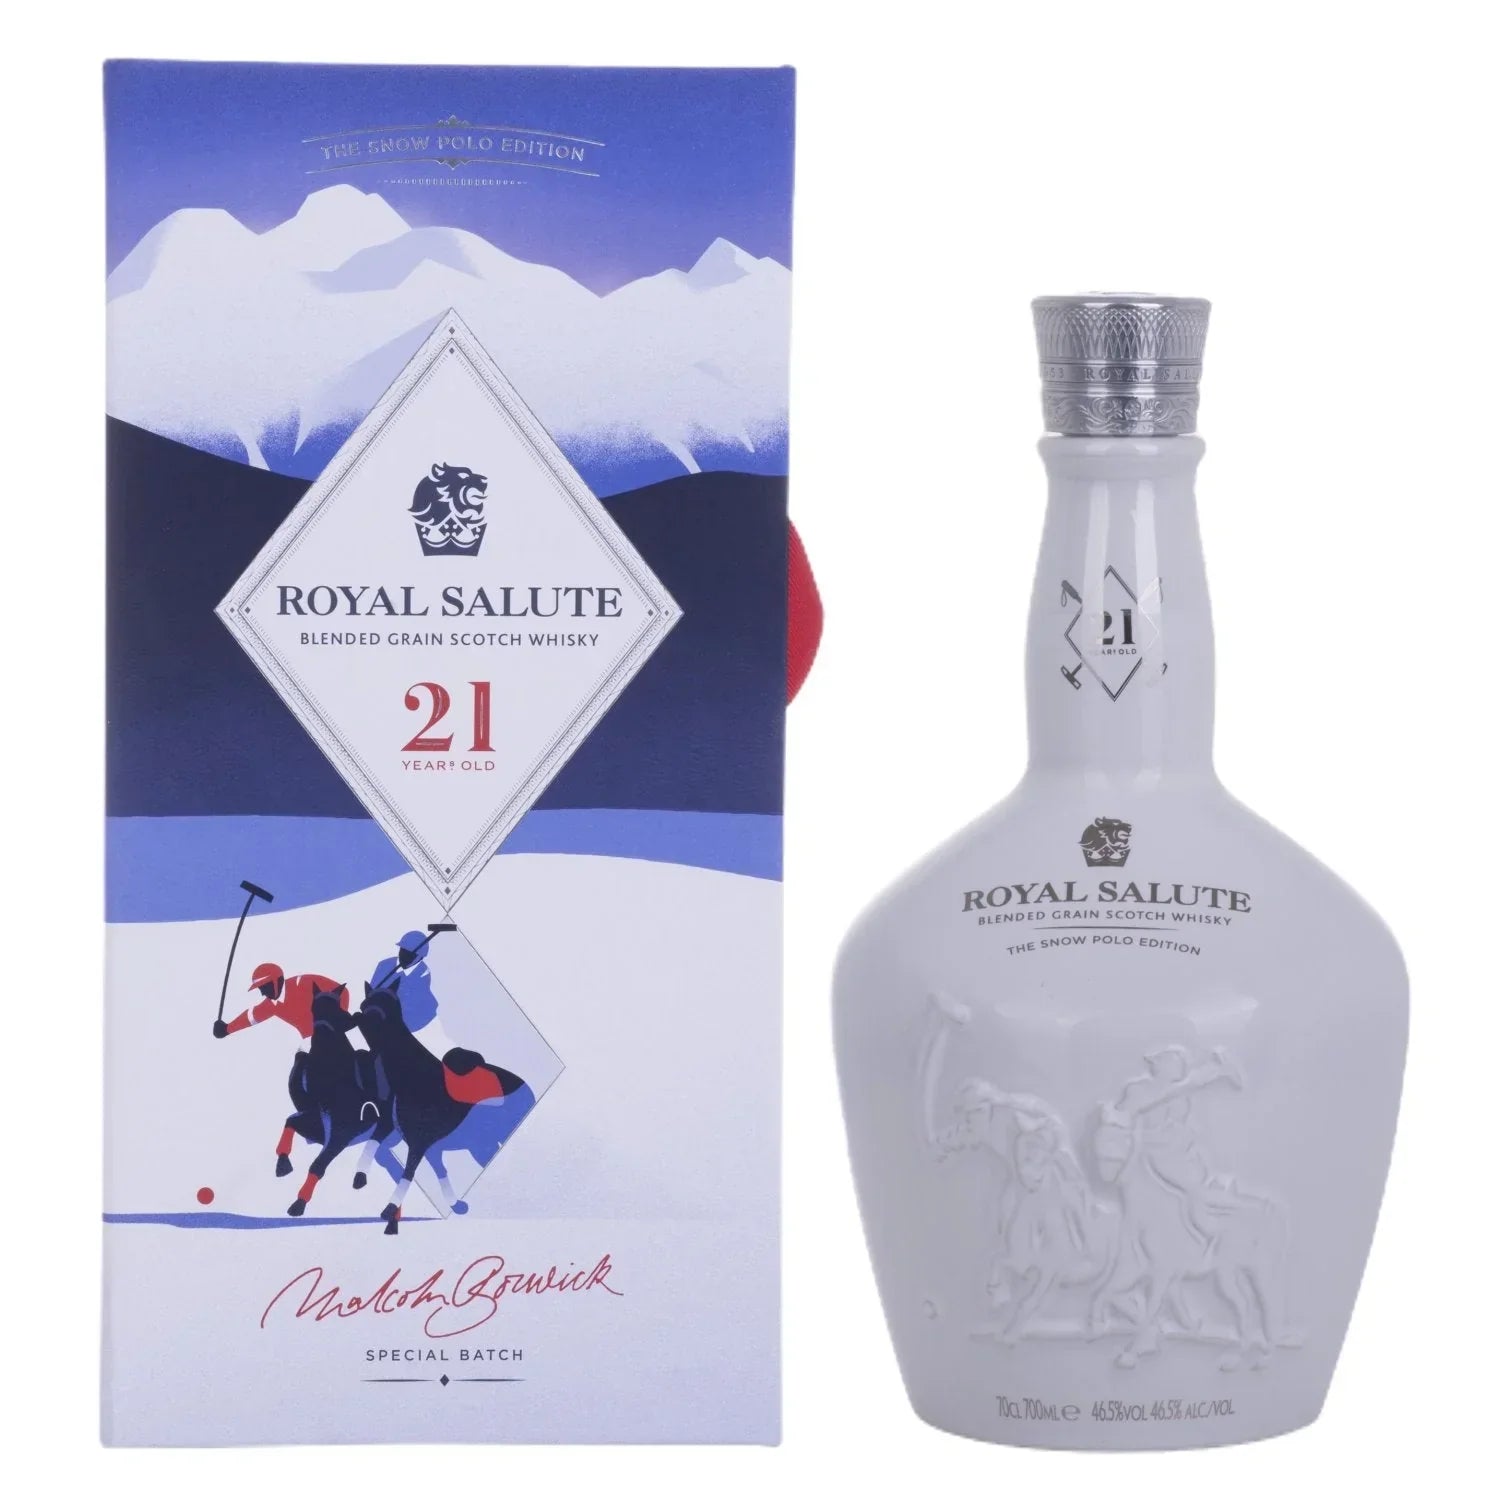 Royal Salute 21 Years Old THE SNOW POLO EDITION Blended Grain 46,5% Vol. 0,7l in Giftbox